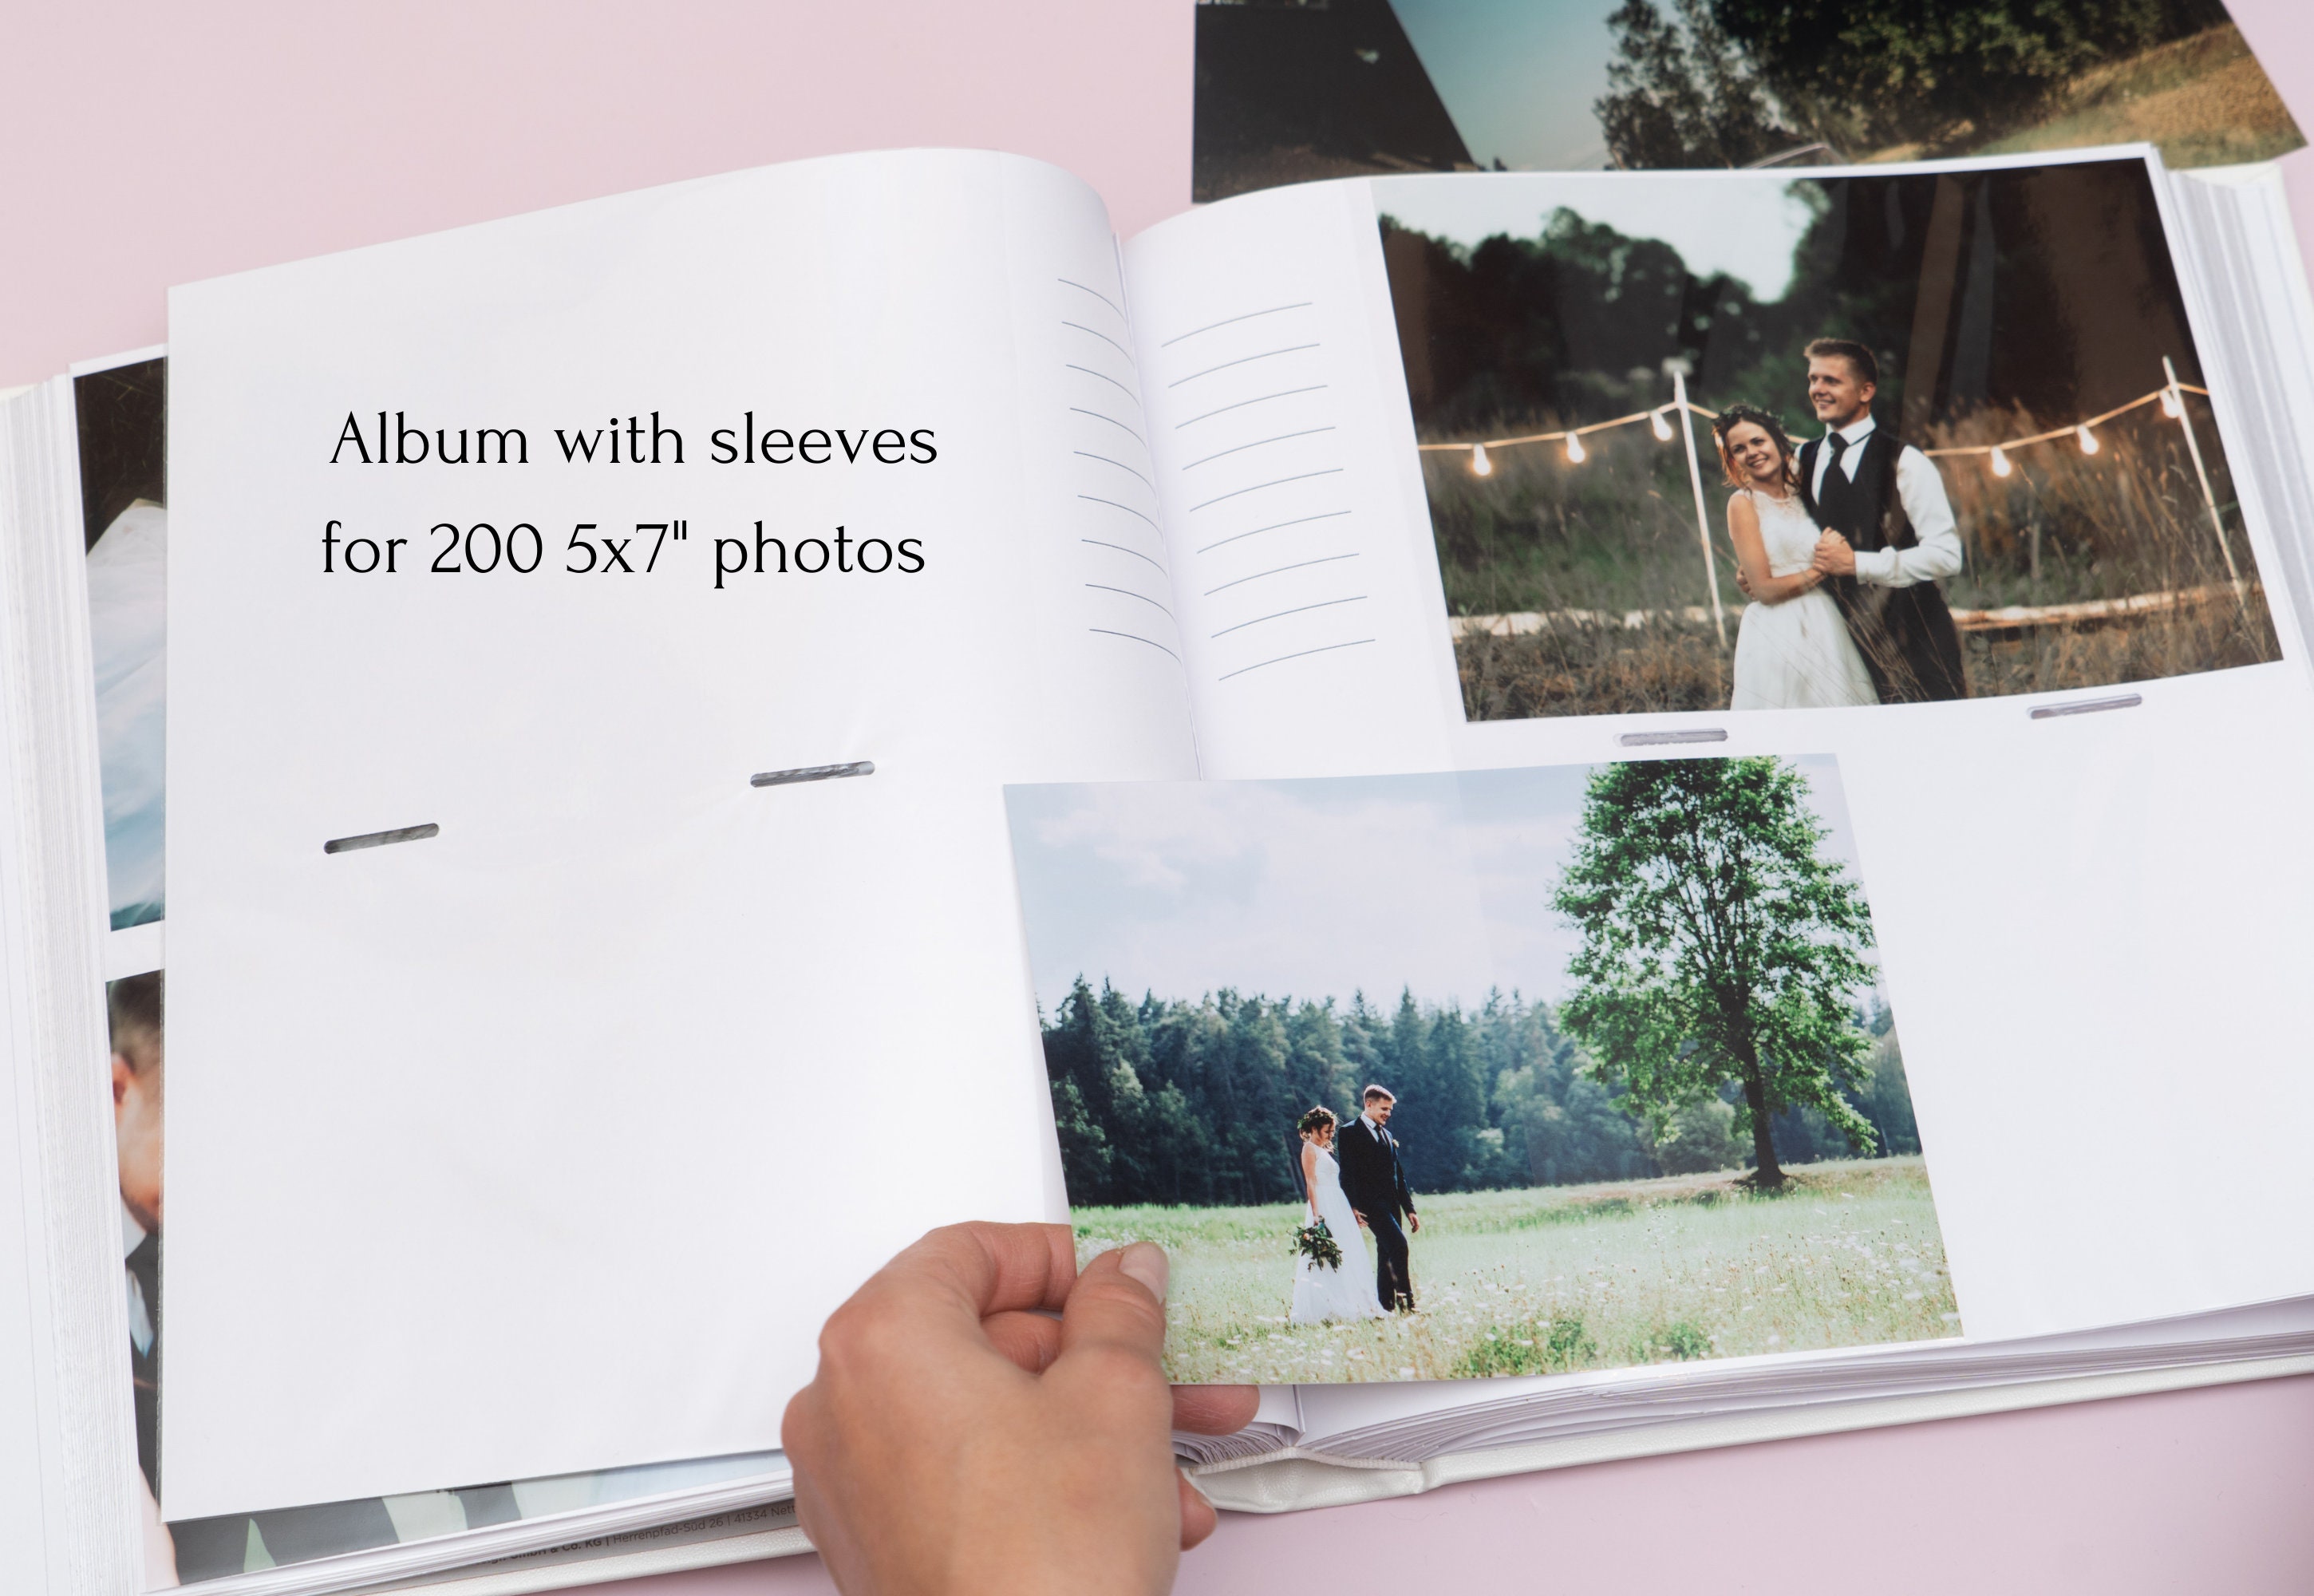 Personalized Photo Album 5x7 for 200 Photos. Pocket Album Photo Album.  Wedding Slip-in Photo Album. Album With Sleeves for 5x7 Photos. -   Norway